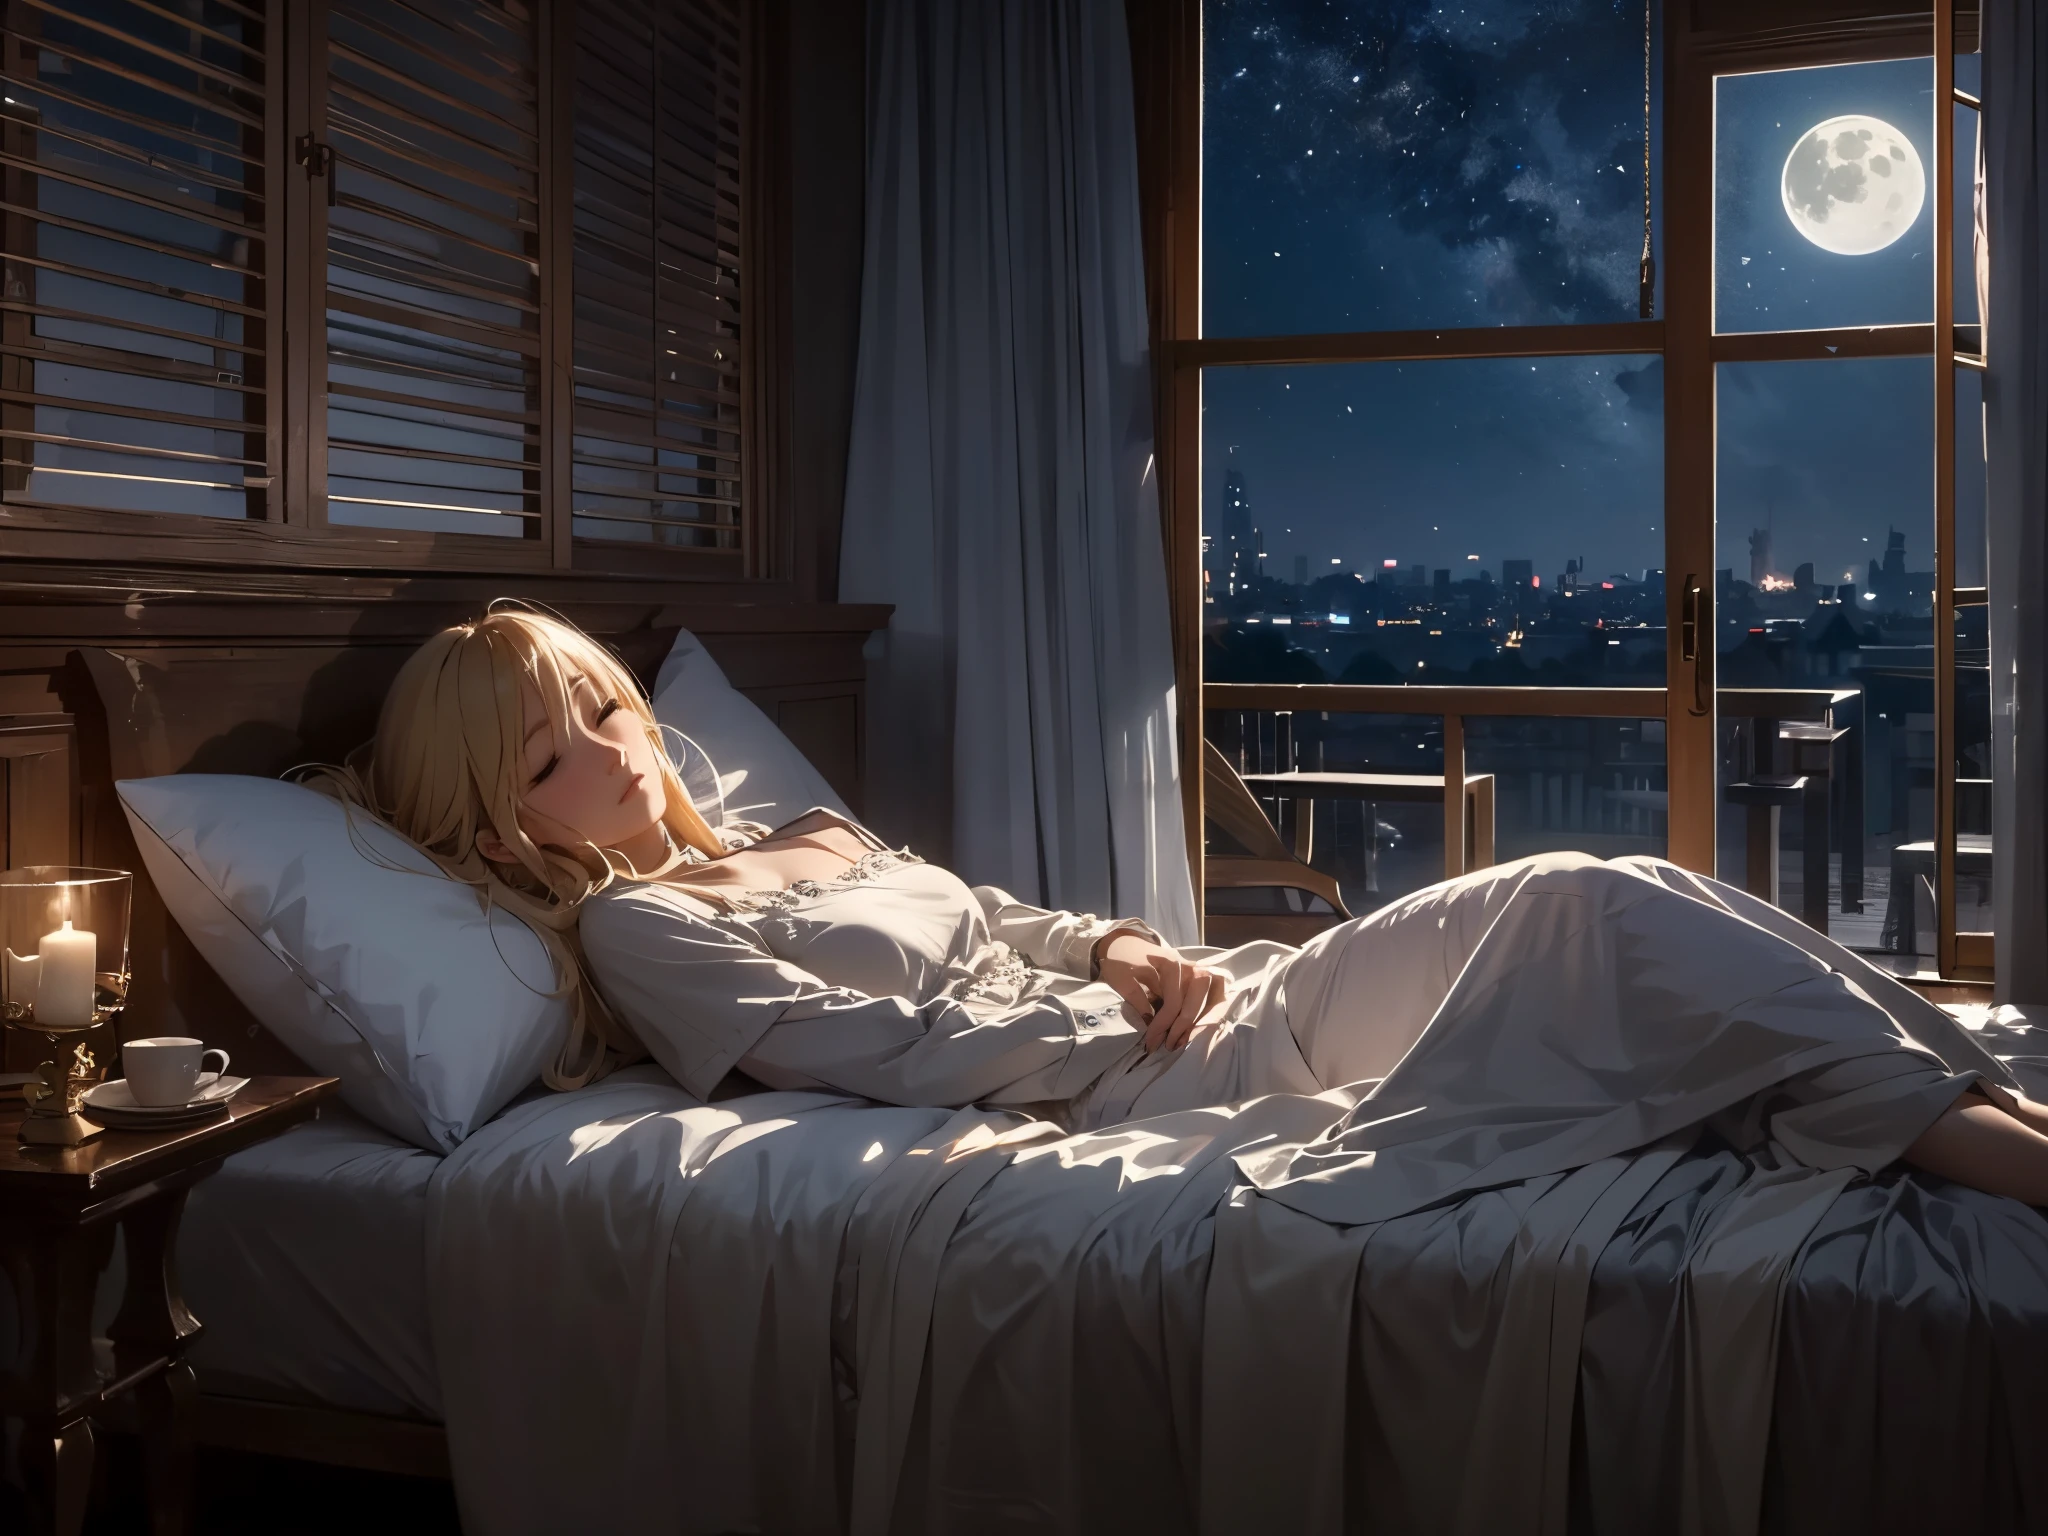 (​masterpiece),(top-quality:1.2),1girl in,(masuter piece:1.3),exquisitedetails, Highest quality 8K resolution, Ultra-detailed, Realistic, (Melody Mark:1.2),Vibrant colors, Soft tones, With warm and gentle lighting,In a serene, Long blonde woman sleeping on bed in bedroom. Her eyes, Quietly closed, The air of silence in the room. Outside, From a nearby window, appearing。 (Night Moon), Painting the world with a gentle glow, Midnight Dawn. Inside, The room is dimly lit, (Dim lighting) aura, Enveloped in the silence of the moonlight. This atmosphere, accompany (Gentle night air), Quietly flowing around, Enveloping a woman wrapped in a cocoon of silence、Rest in peace、An air of silence